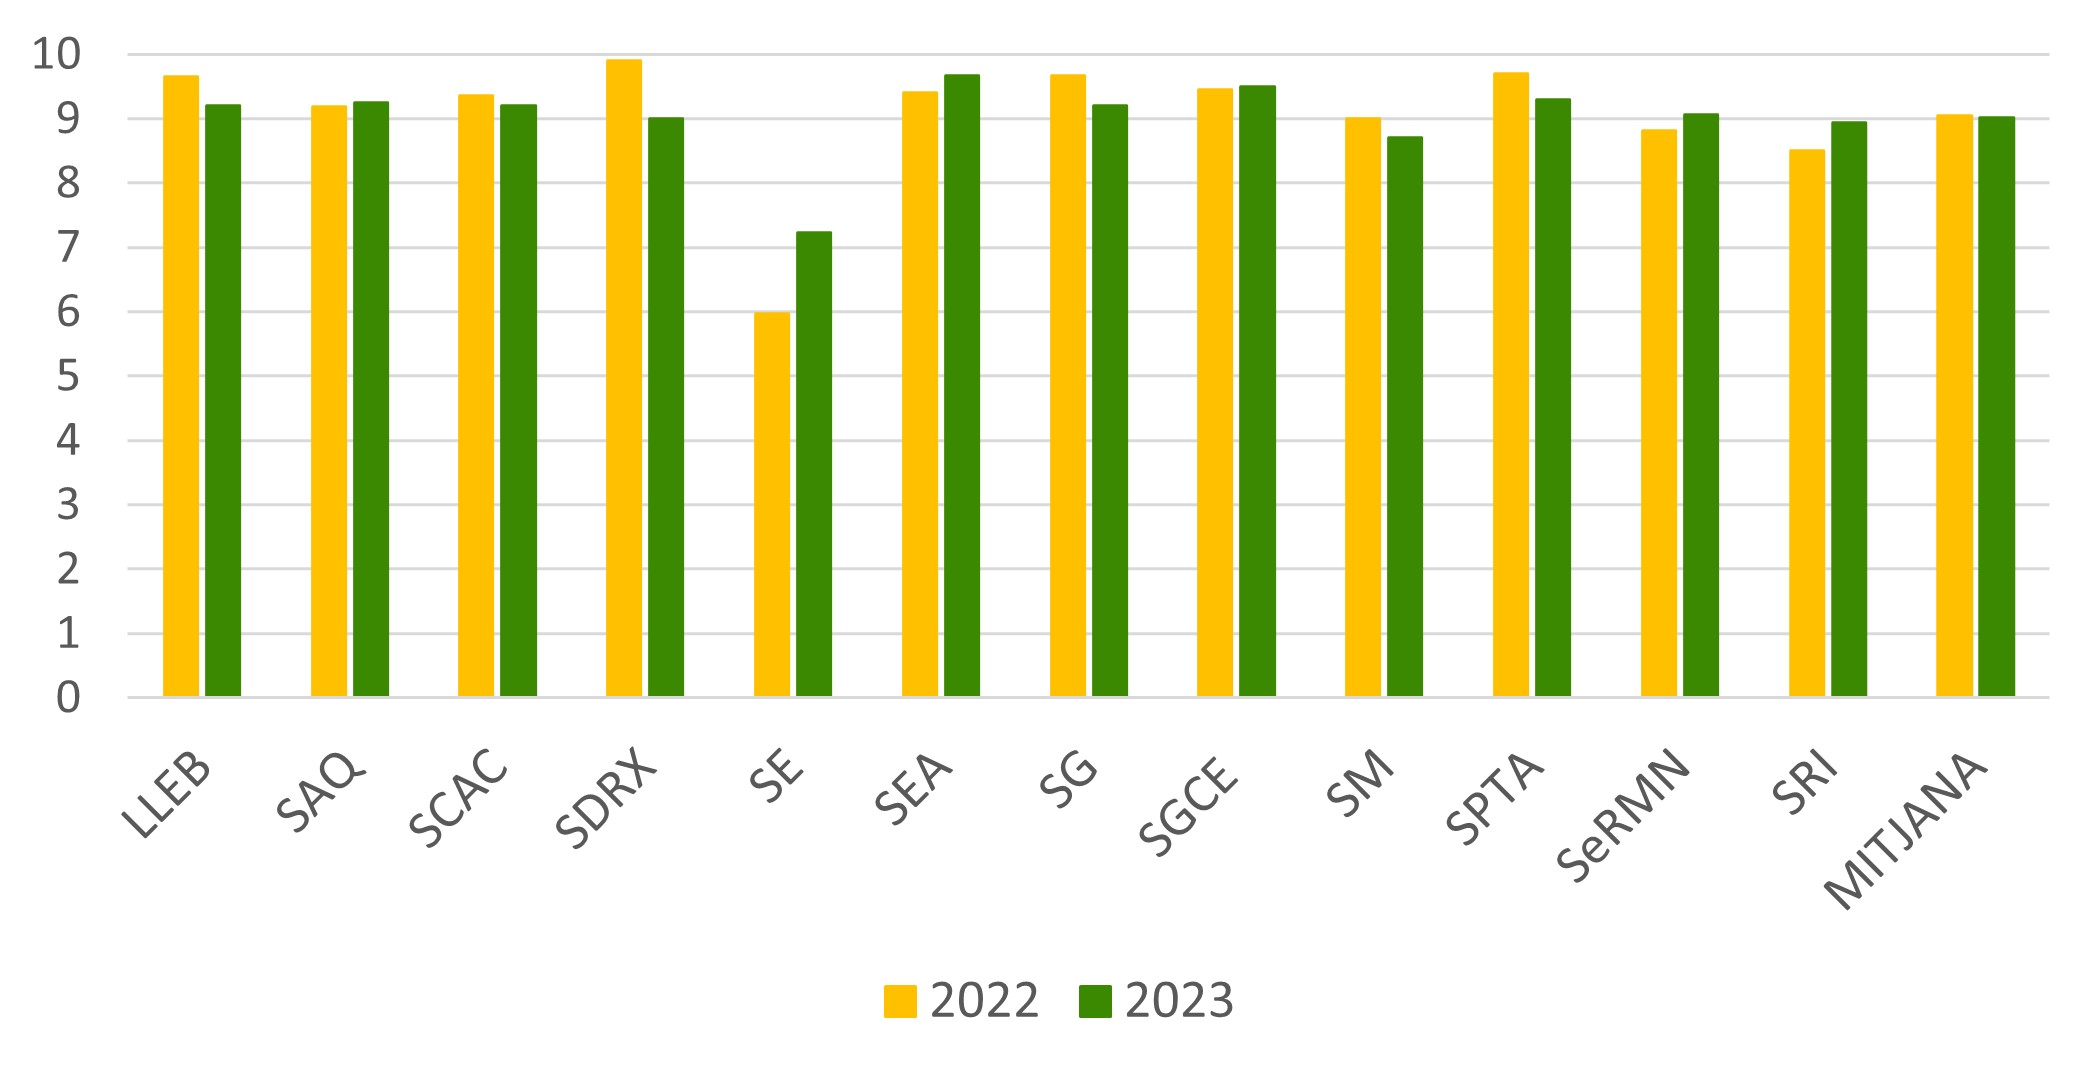 Comparison of the degree of satisfaction in 2023 compared to 2022